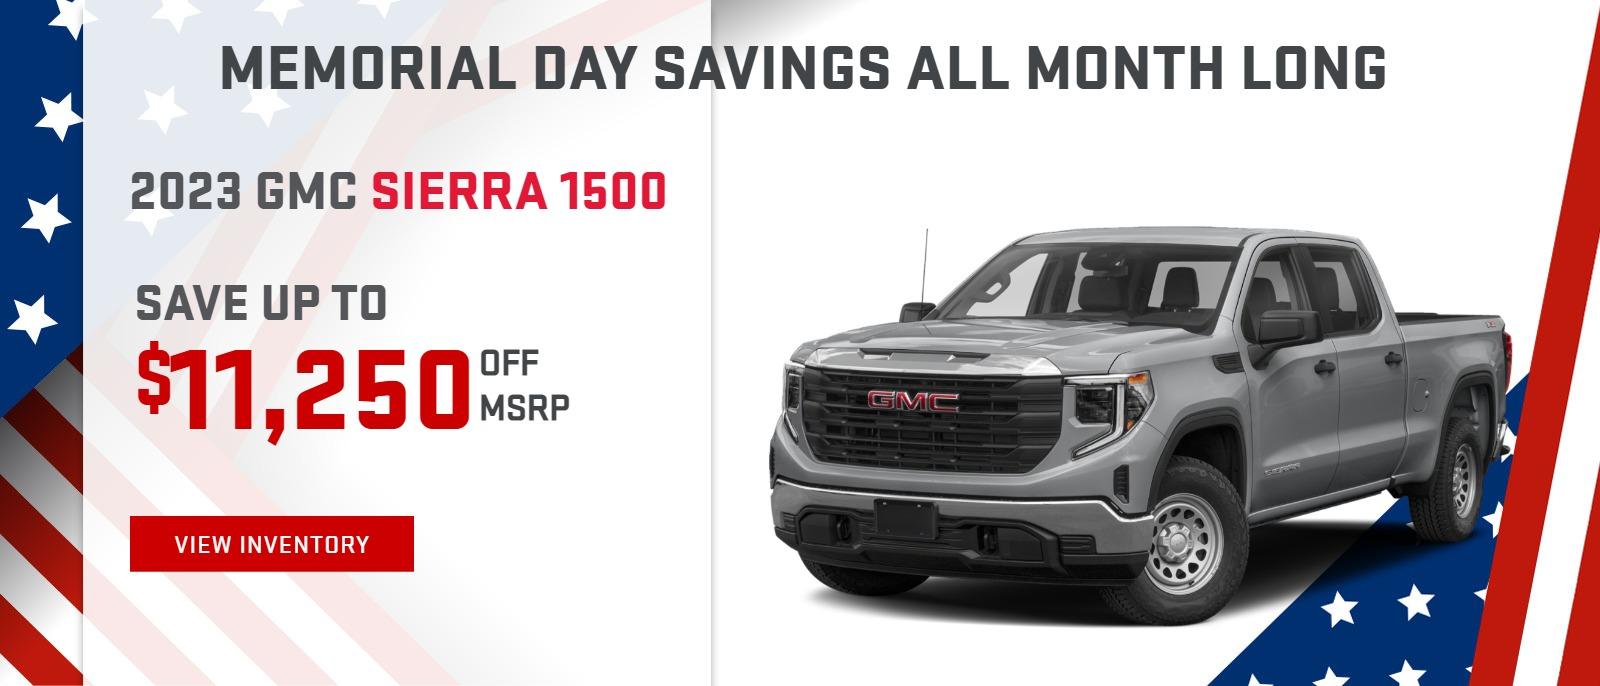 Memorial Day Savings All Month Long

2023 Sierra 1500 SAVE UP TO $11,250 OFF MSRP